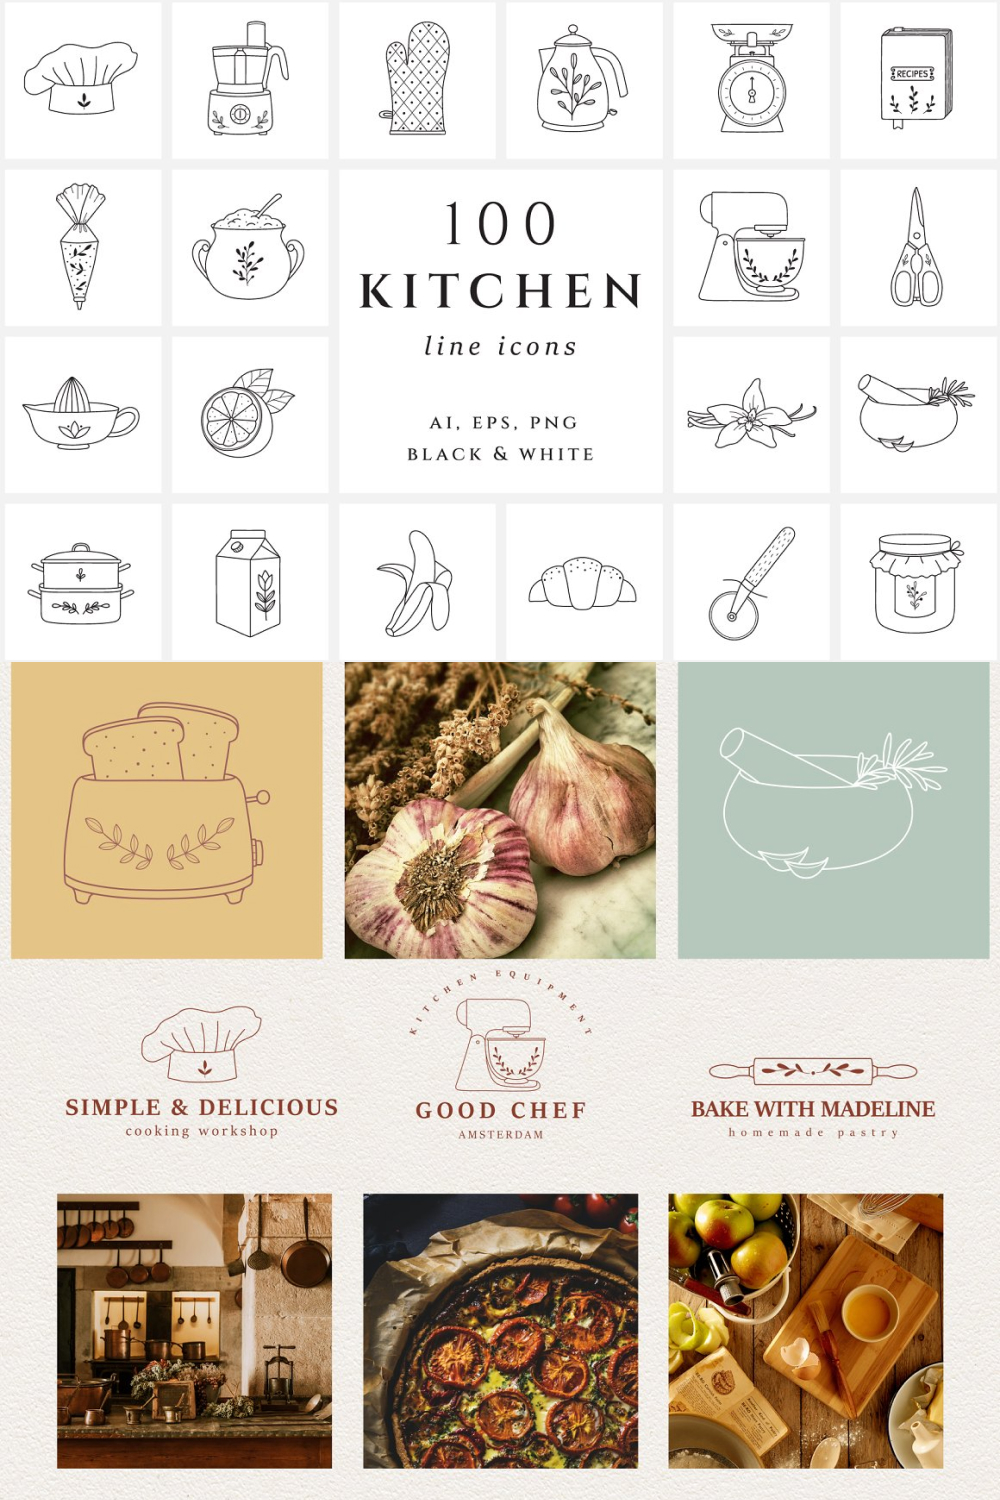 Kitchen & Cooking Icons - Pinterest.